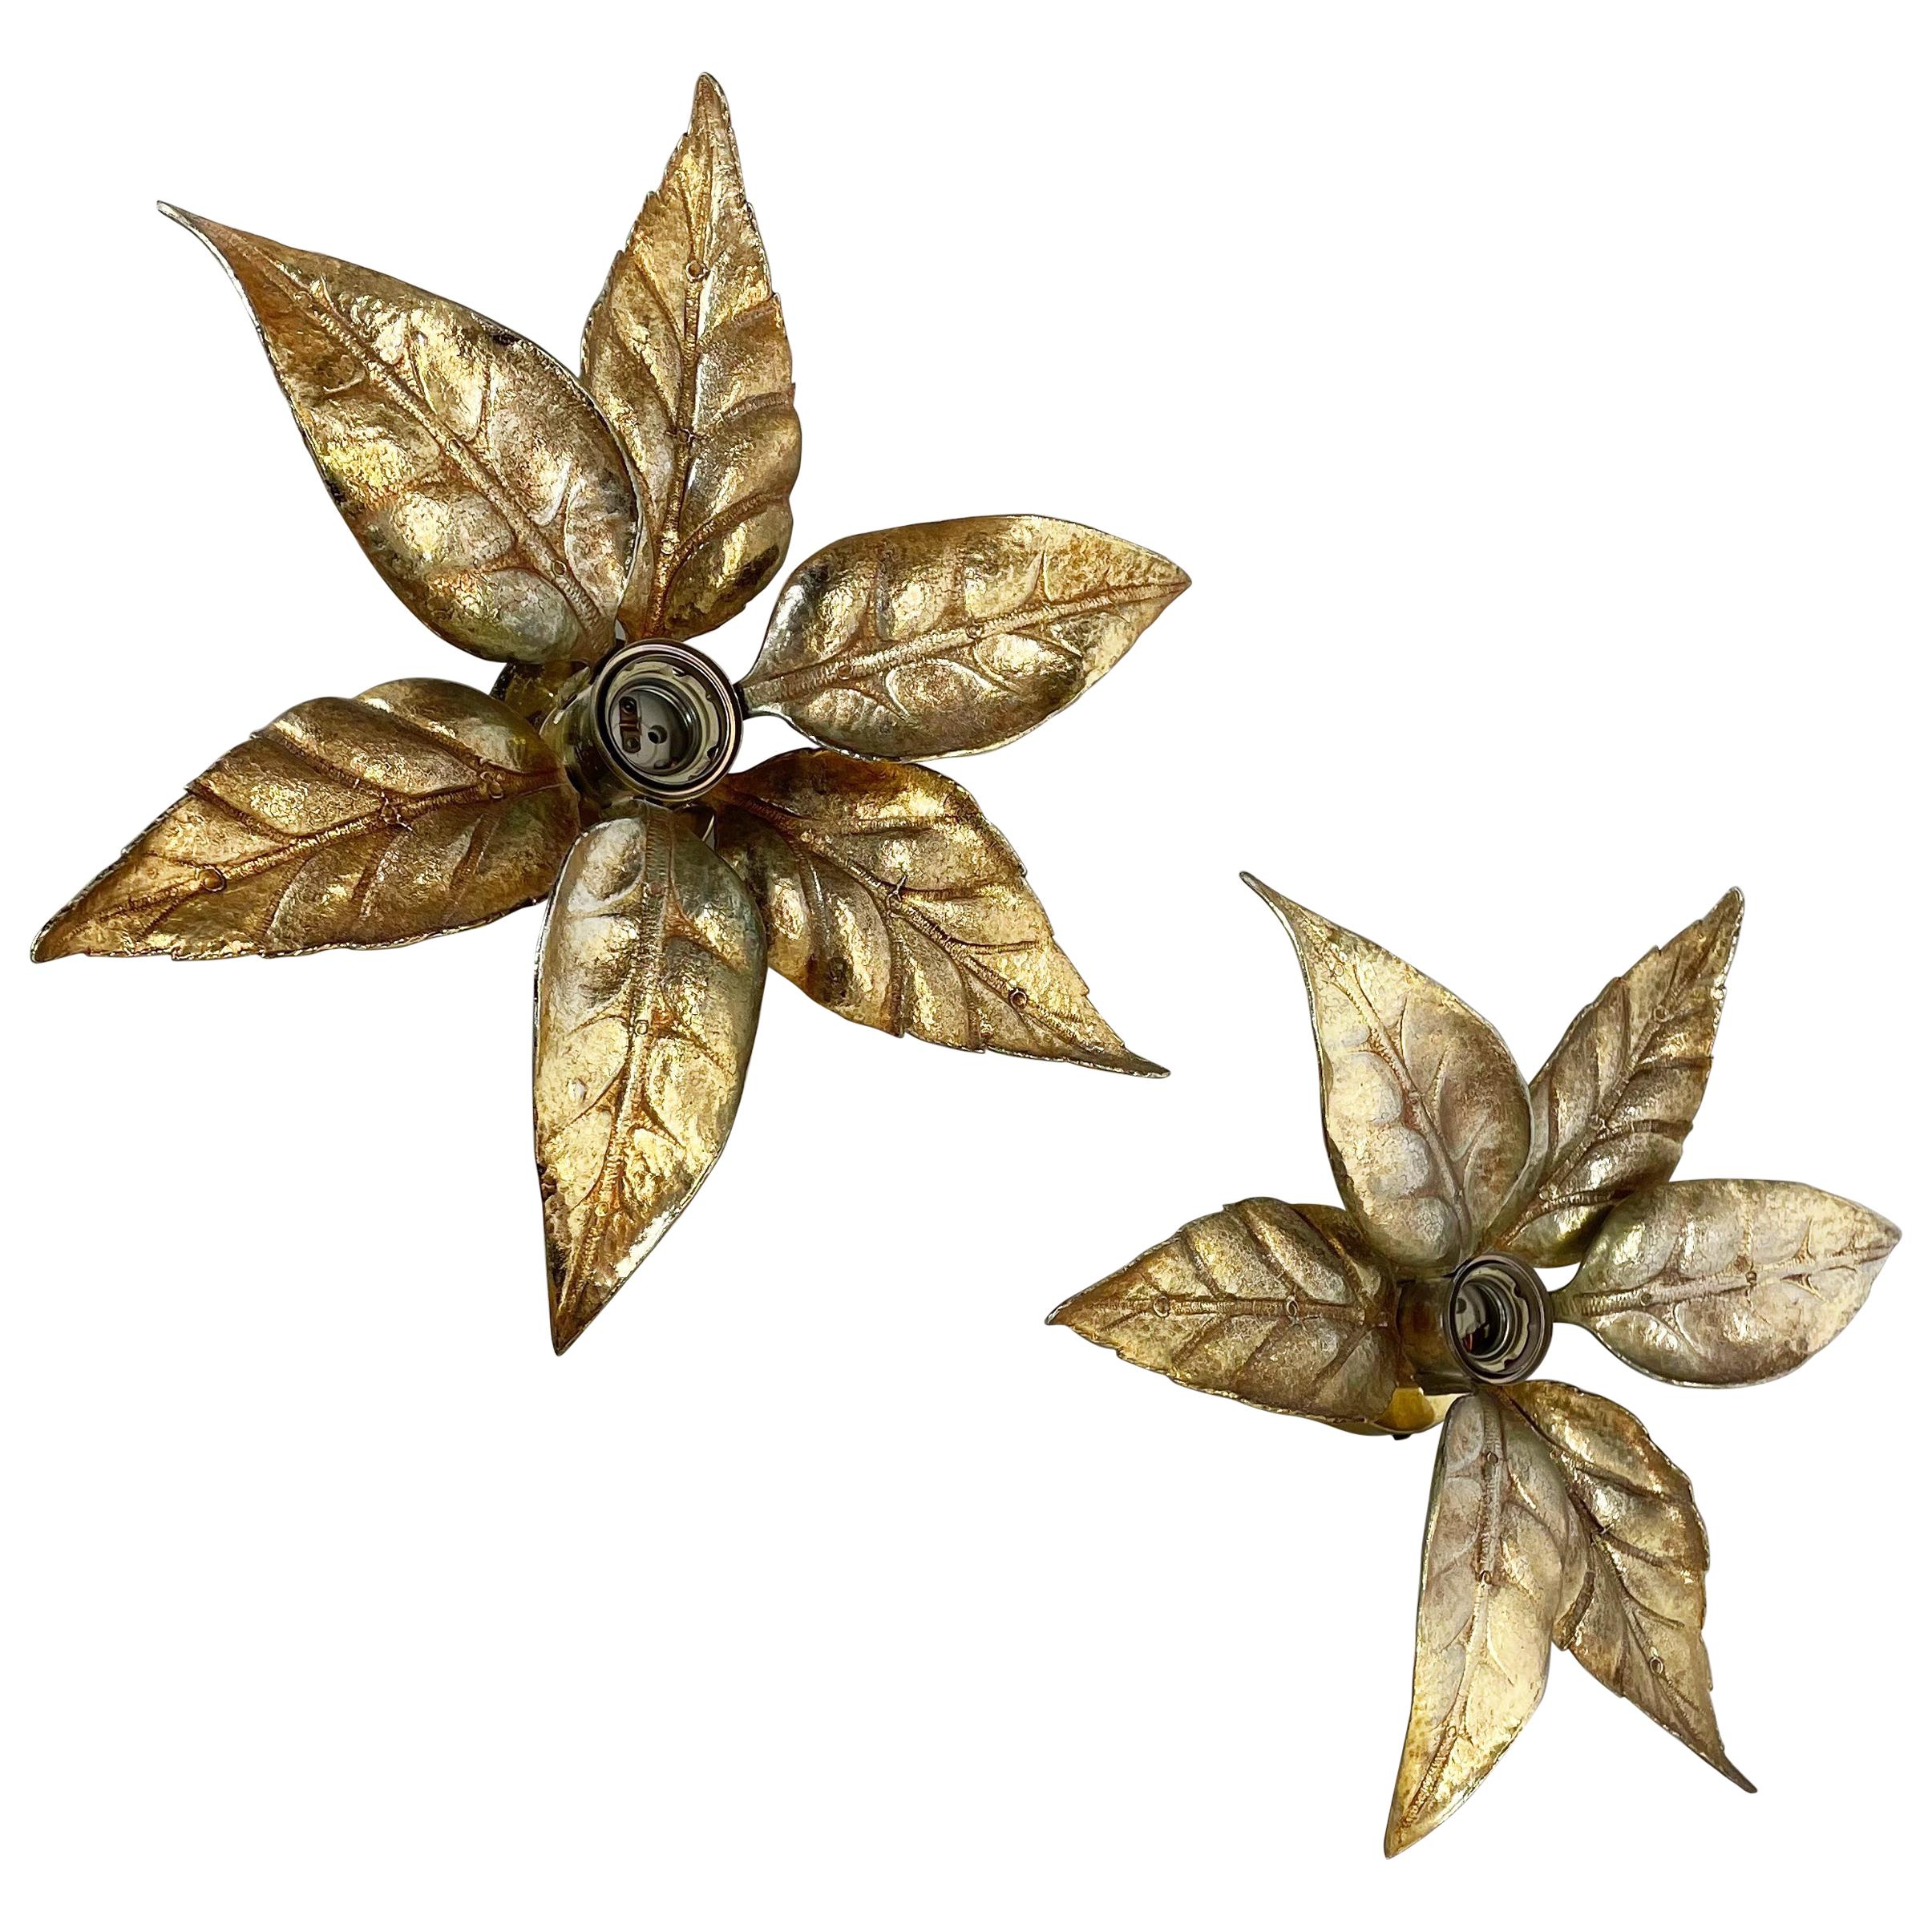 Set of 2 Floral Brutalist Brass Metal Wall Ceiling Light by Willy Daro, Belgium